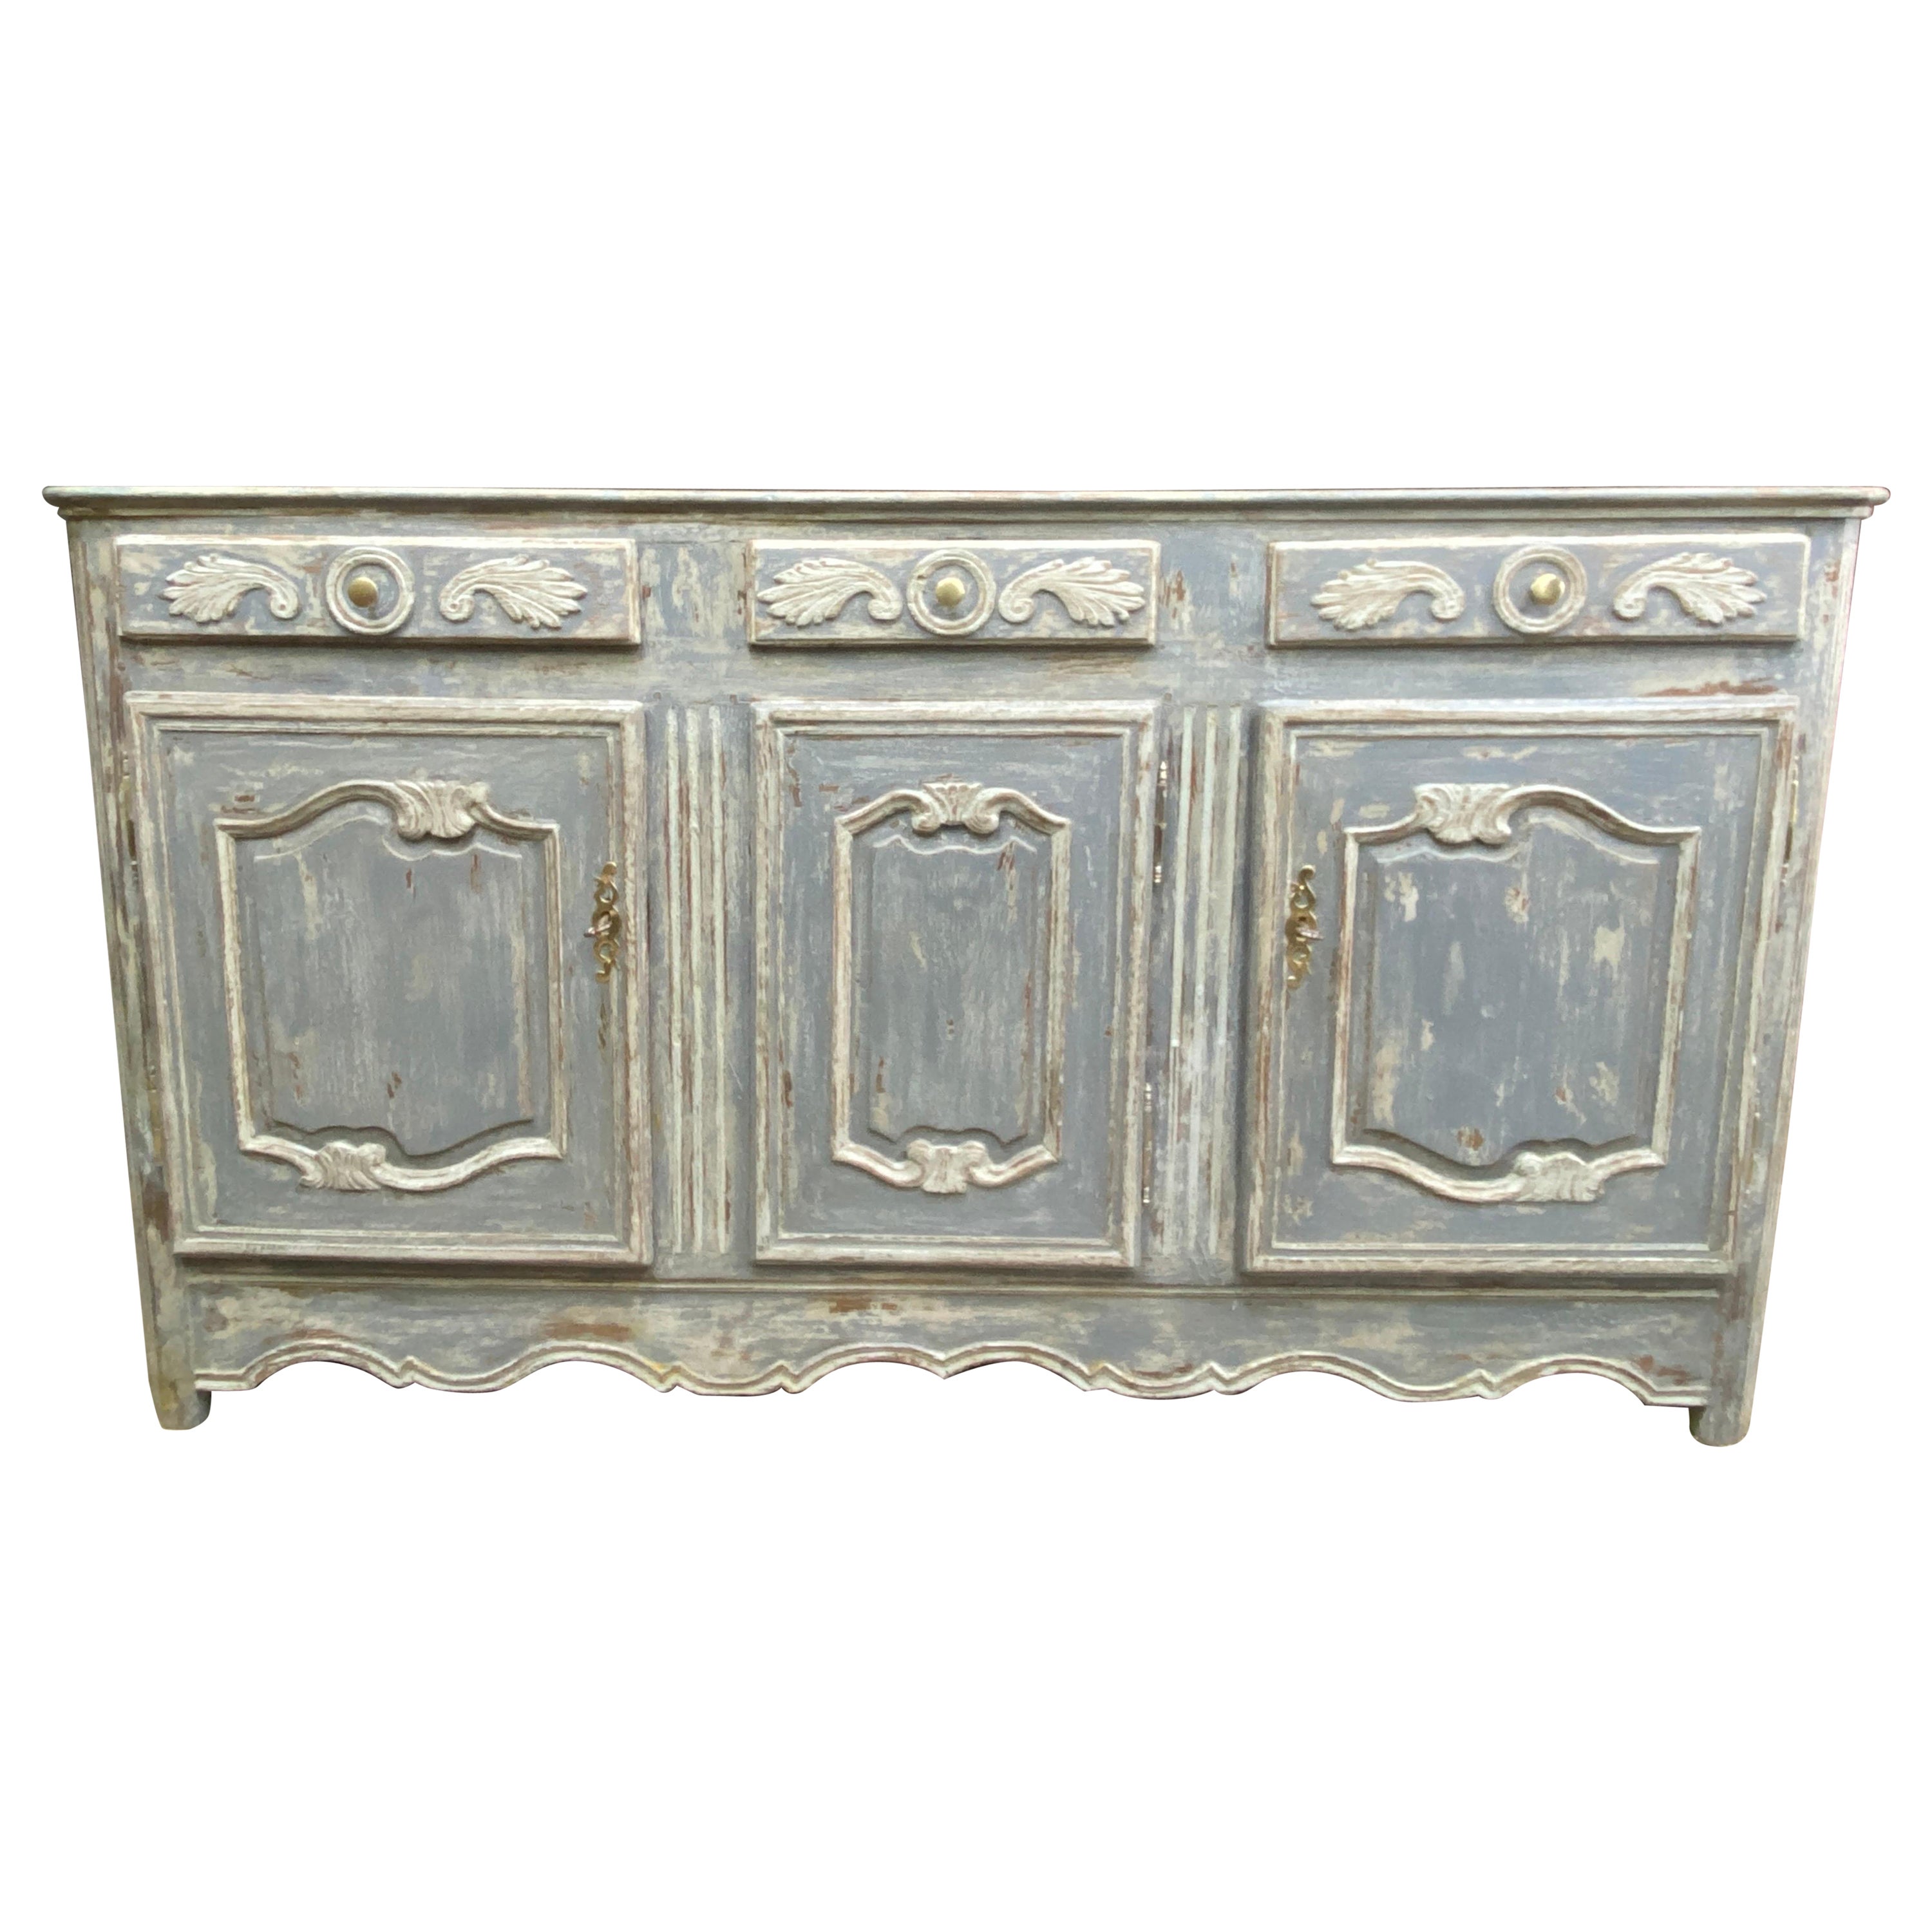 Sideboard 18th century Louis xiv For Sale